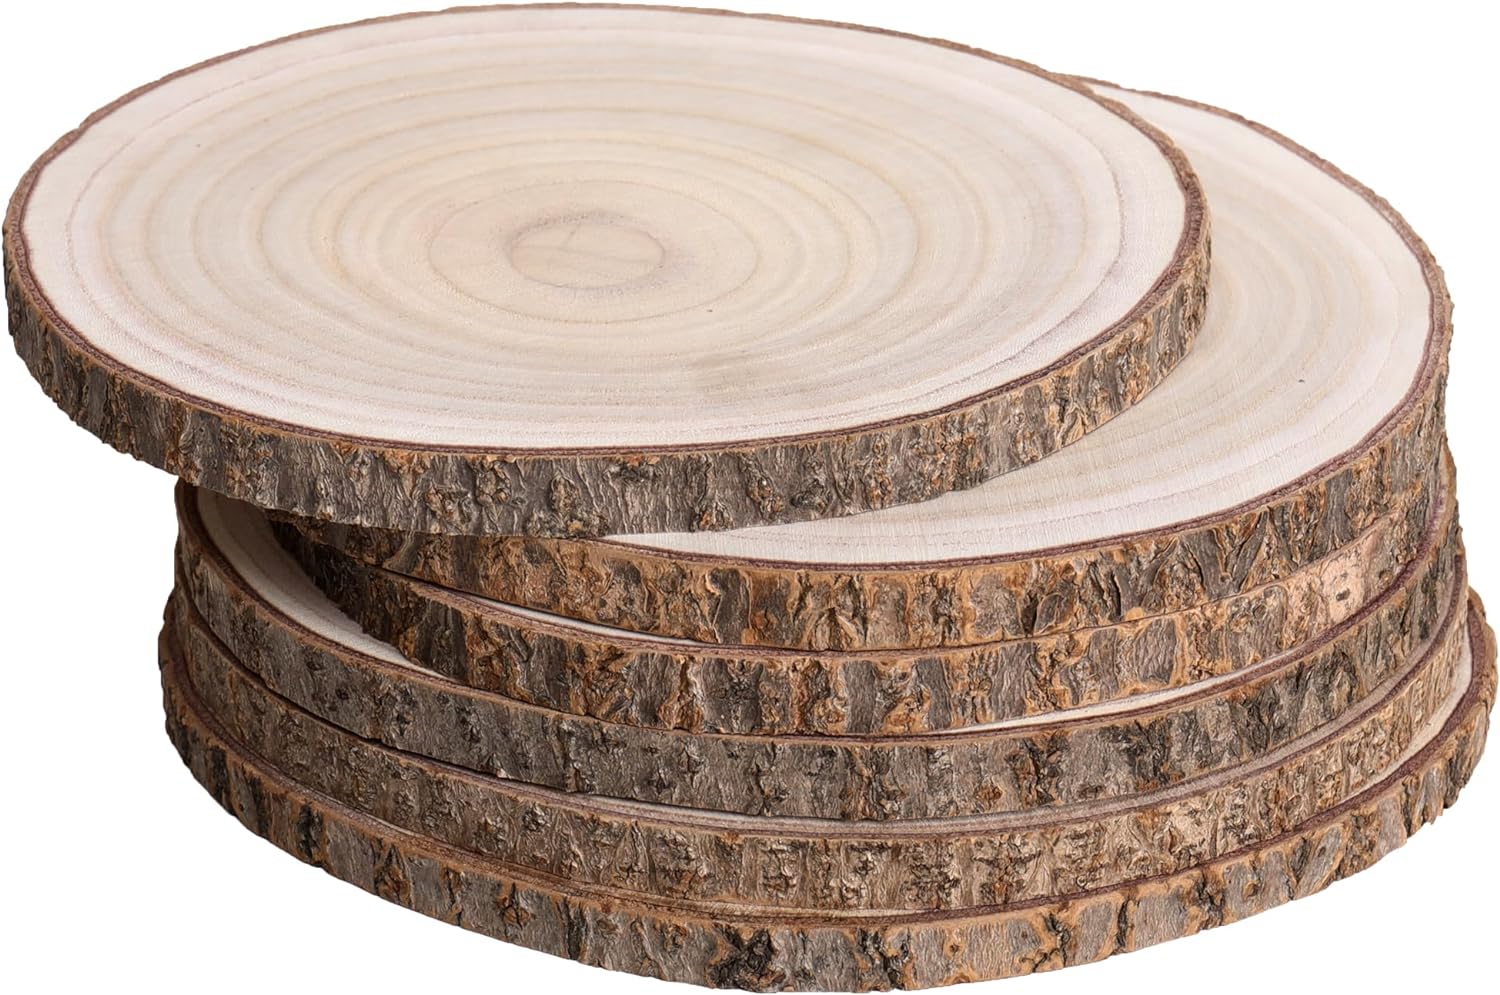  Wood Slices 6 Pack 7-8 Wood Rounds, Large Wood Slices for  Centerpieces Unfinished Wooden Ornaments for Crafts,Wedding,Table  Centerpieces,DIY Projects,Painting : Home & Kitchen